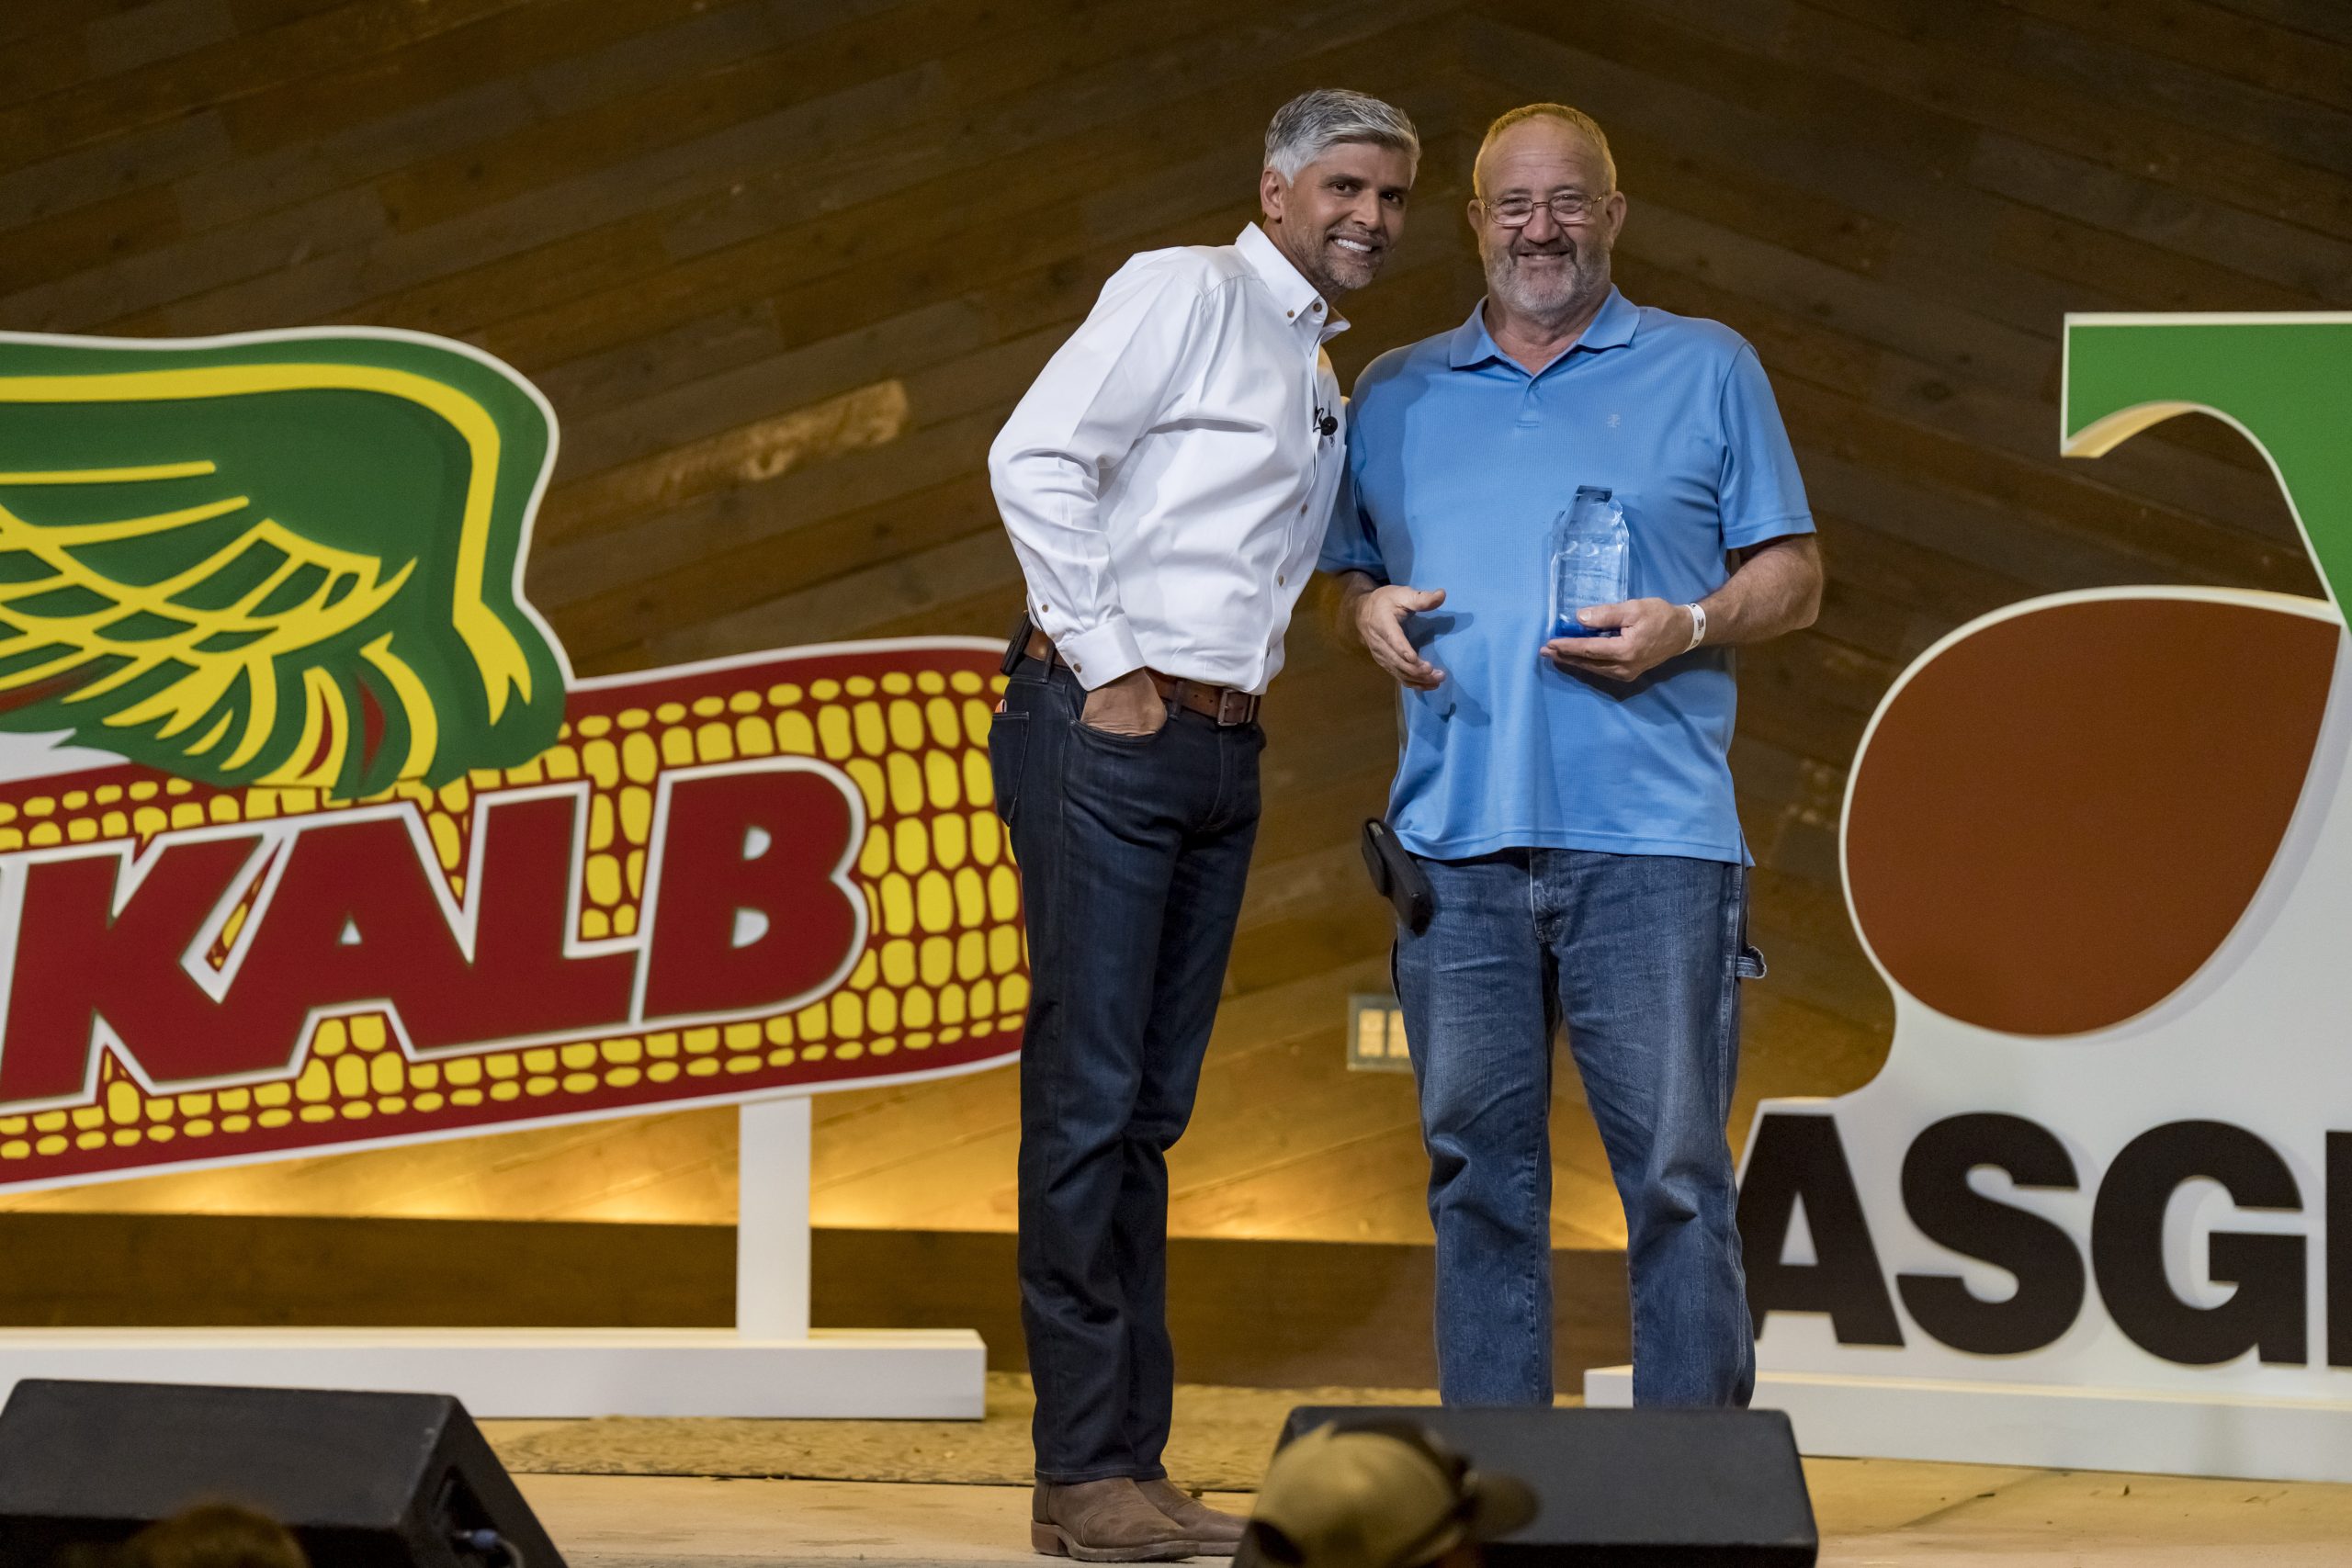 Dickinson County, Kansas, soybean grower Gregg Sexton (at right) was recognized by Asgrow during the Commodity Classic with his 96.3 bushel per acre production. His award was presented by DEKALB Asgrow Brand Lead Dipal Chaudhari. (Courtesy photo.)